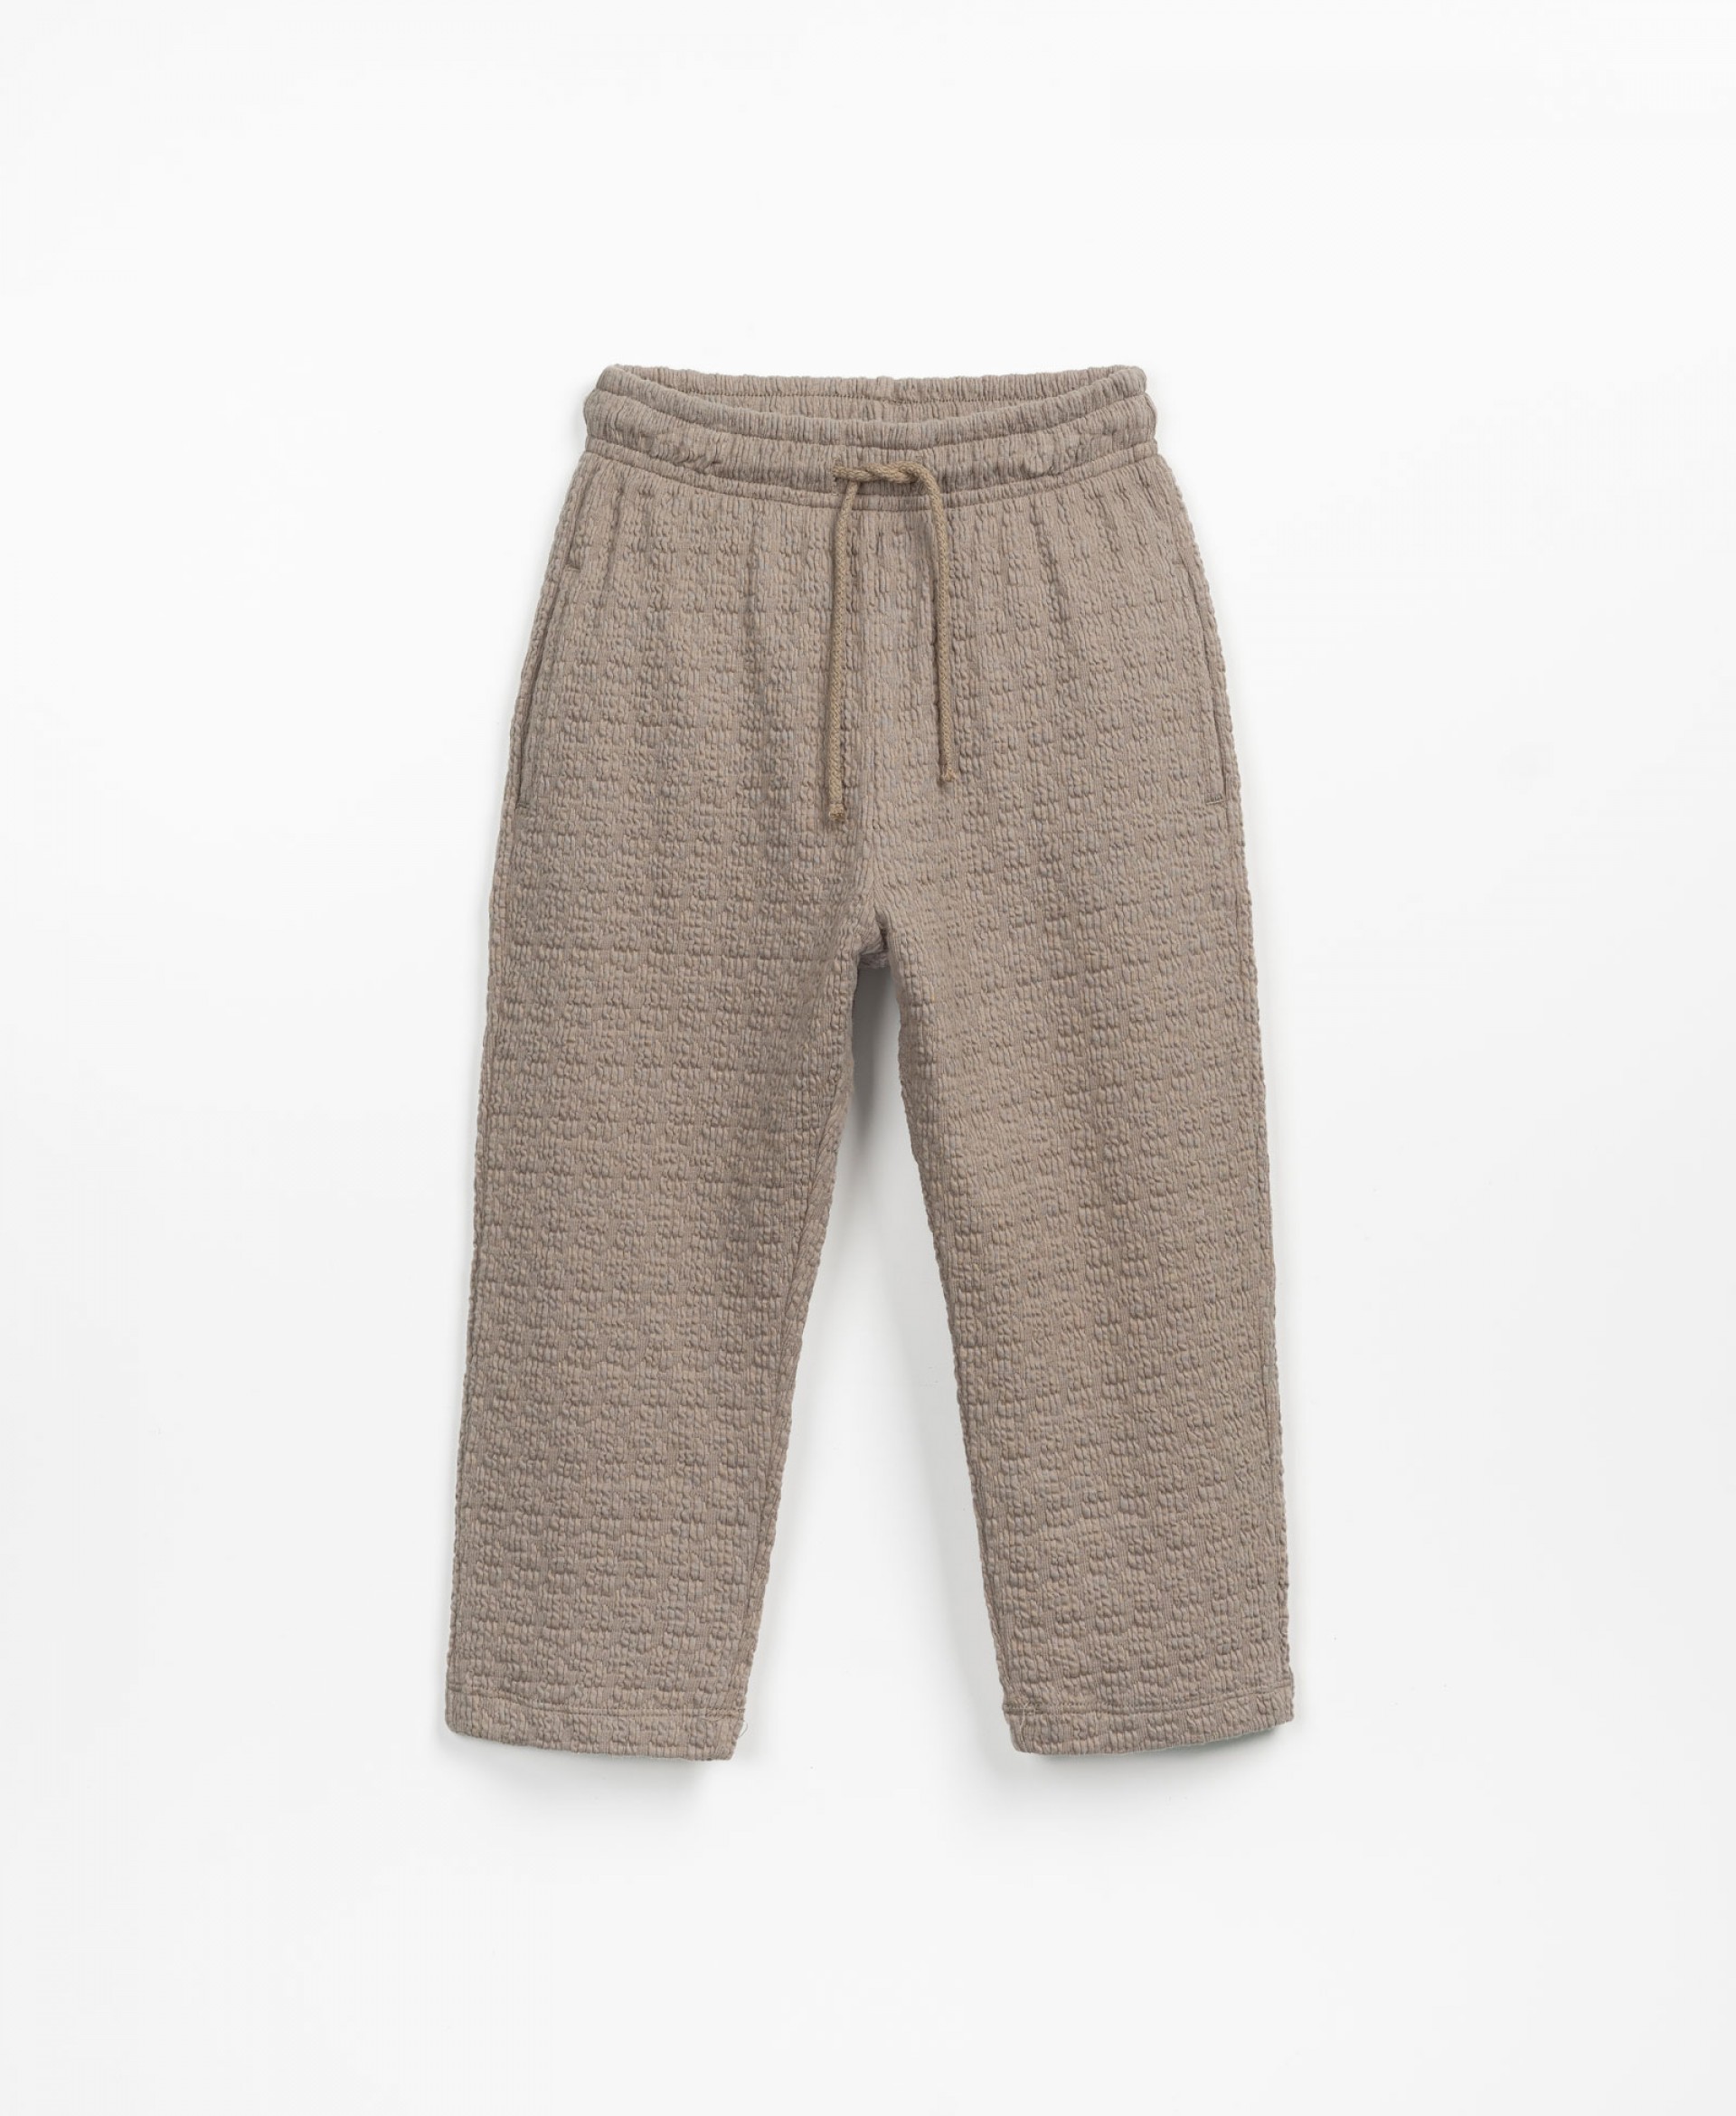 Textured jersey stitch trousers | Textile Art